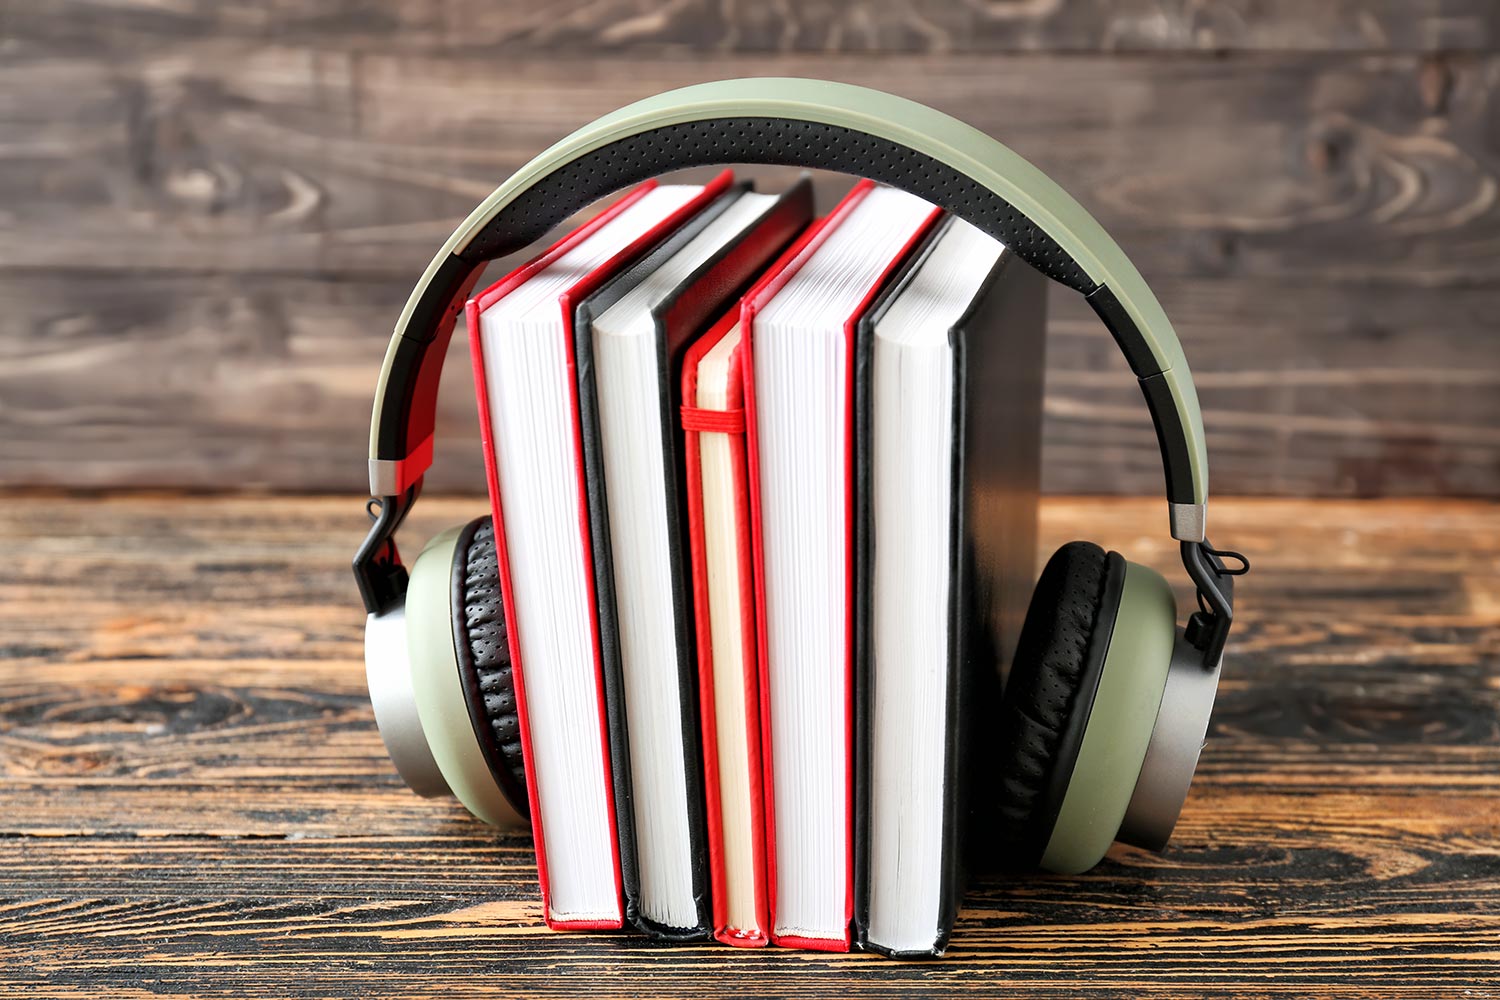 A photo of a pair of headphones on a pile of books